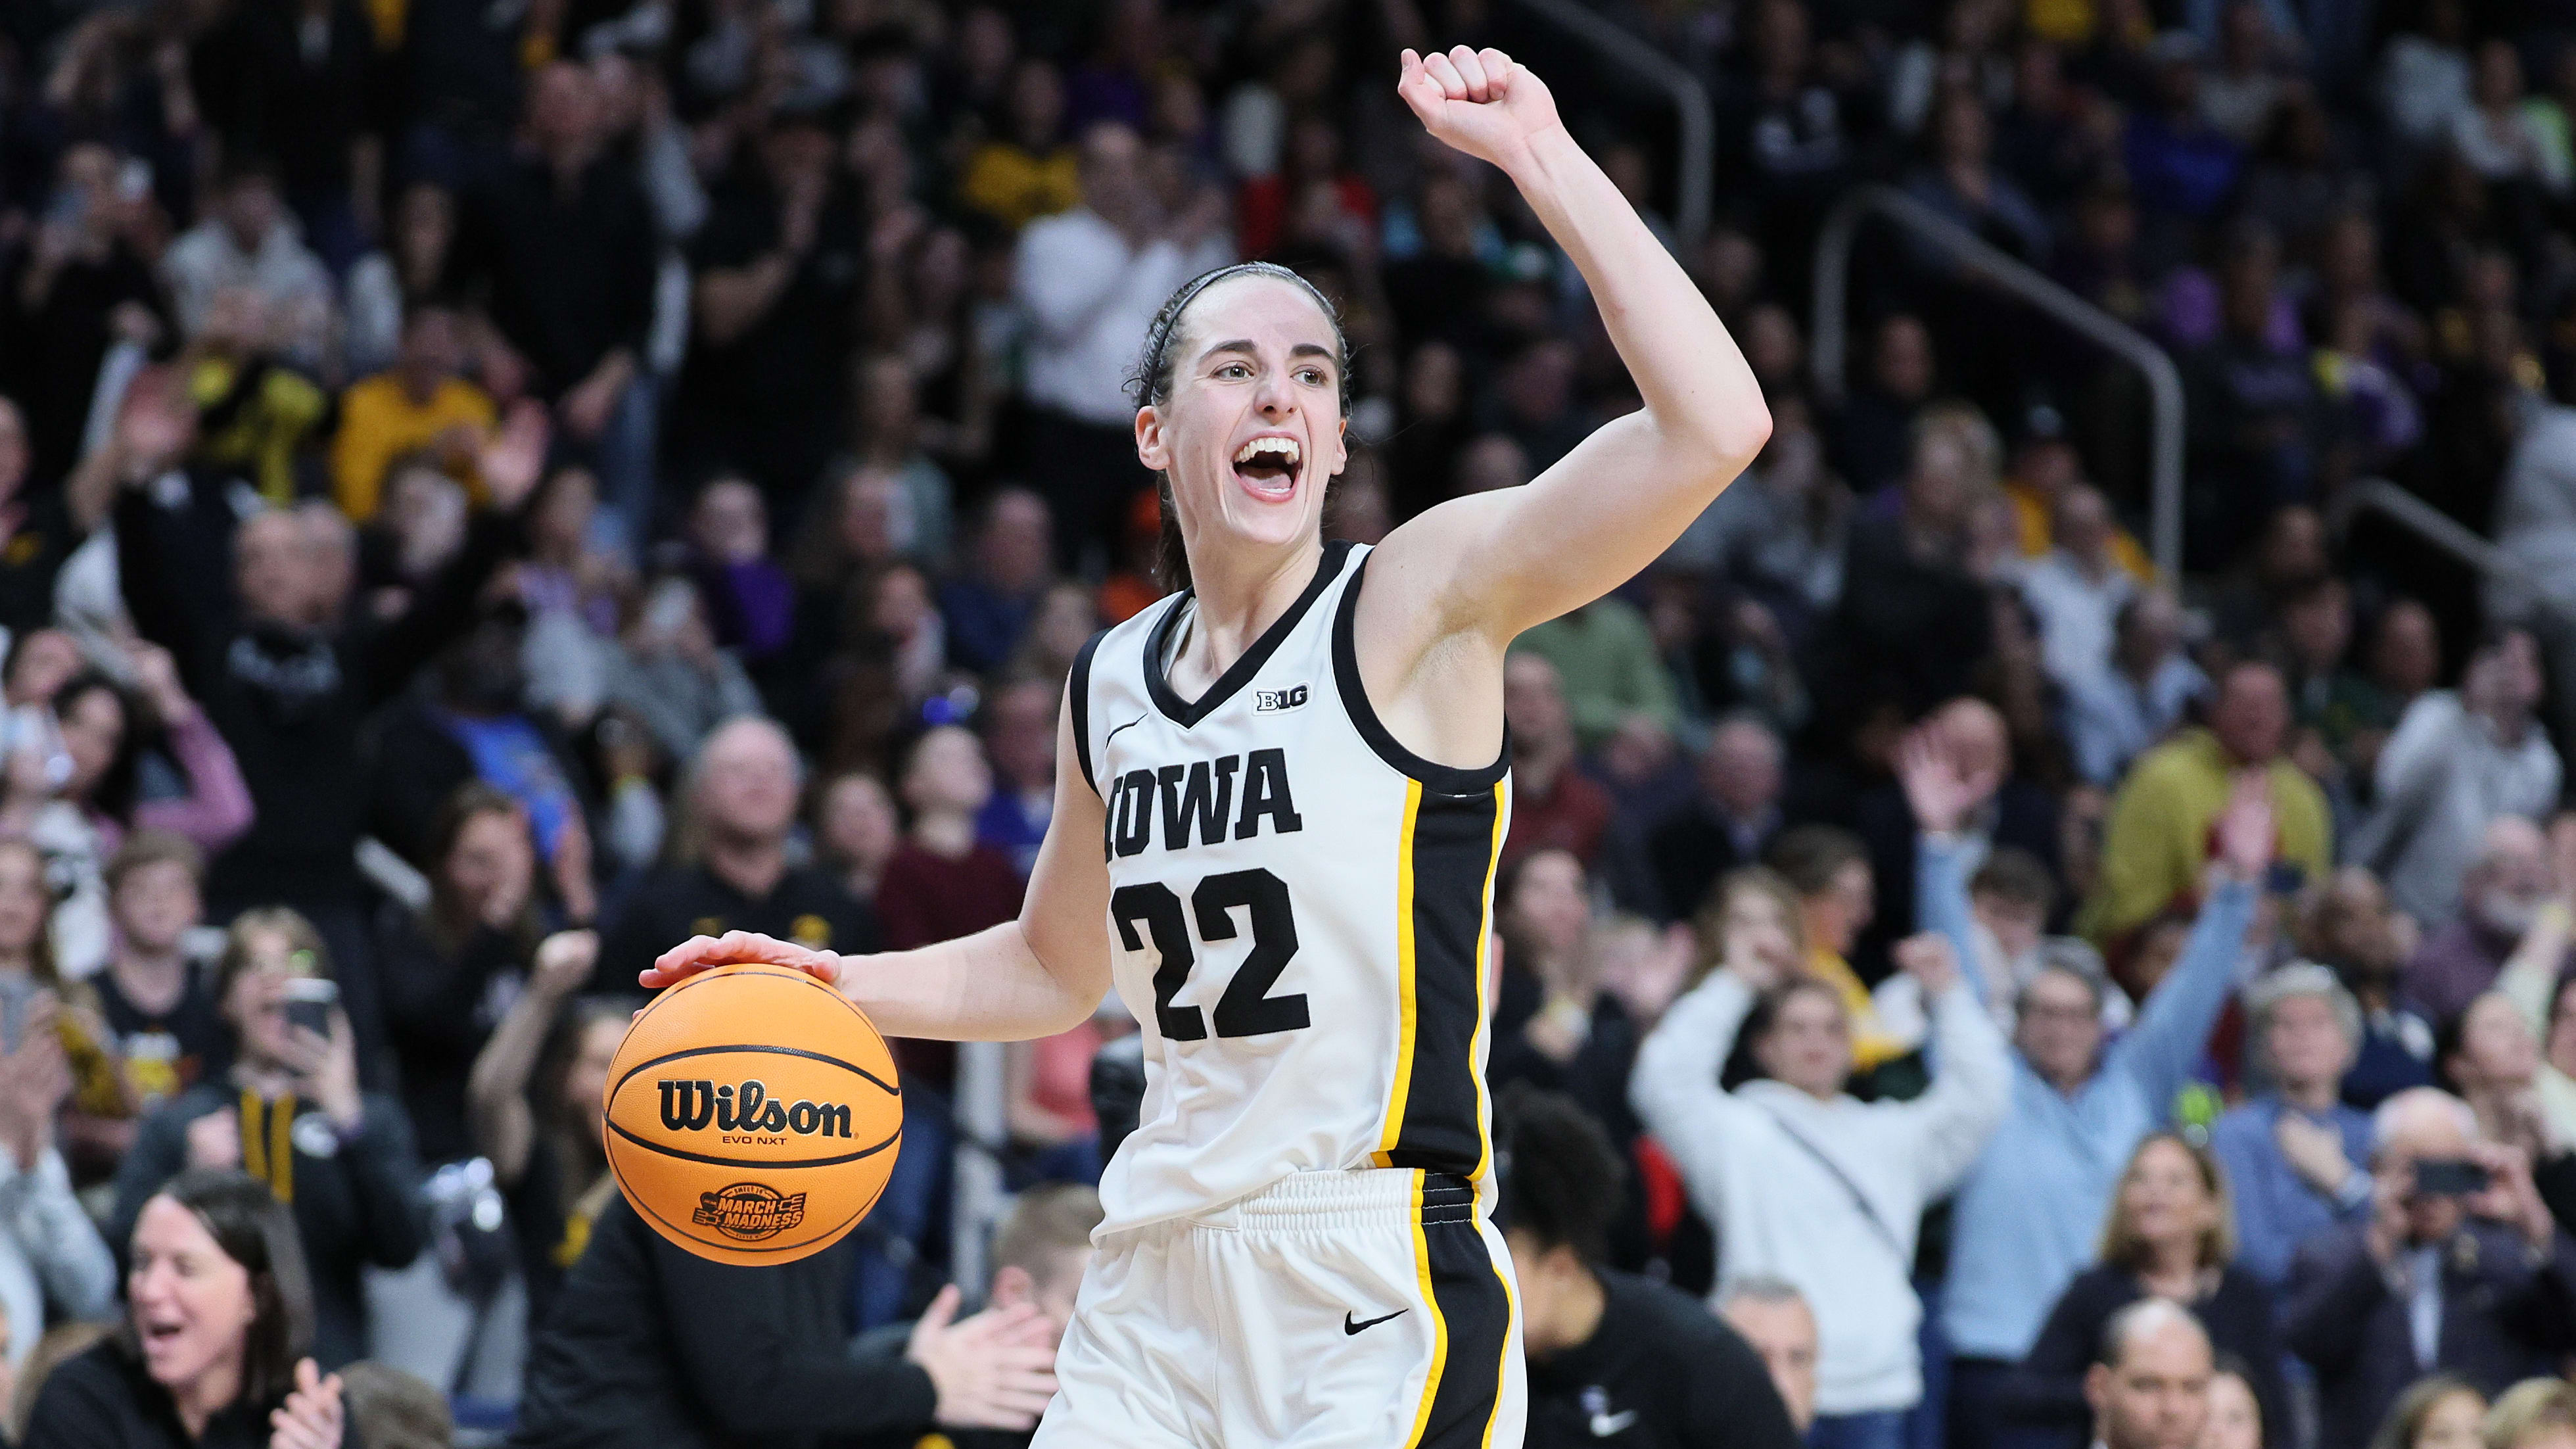 Caitlin Clark celebrates by pumping her left fist into the air while dribbling a basketball